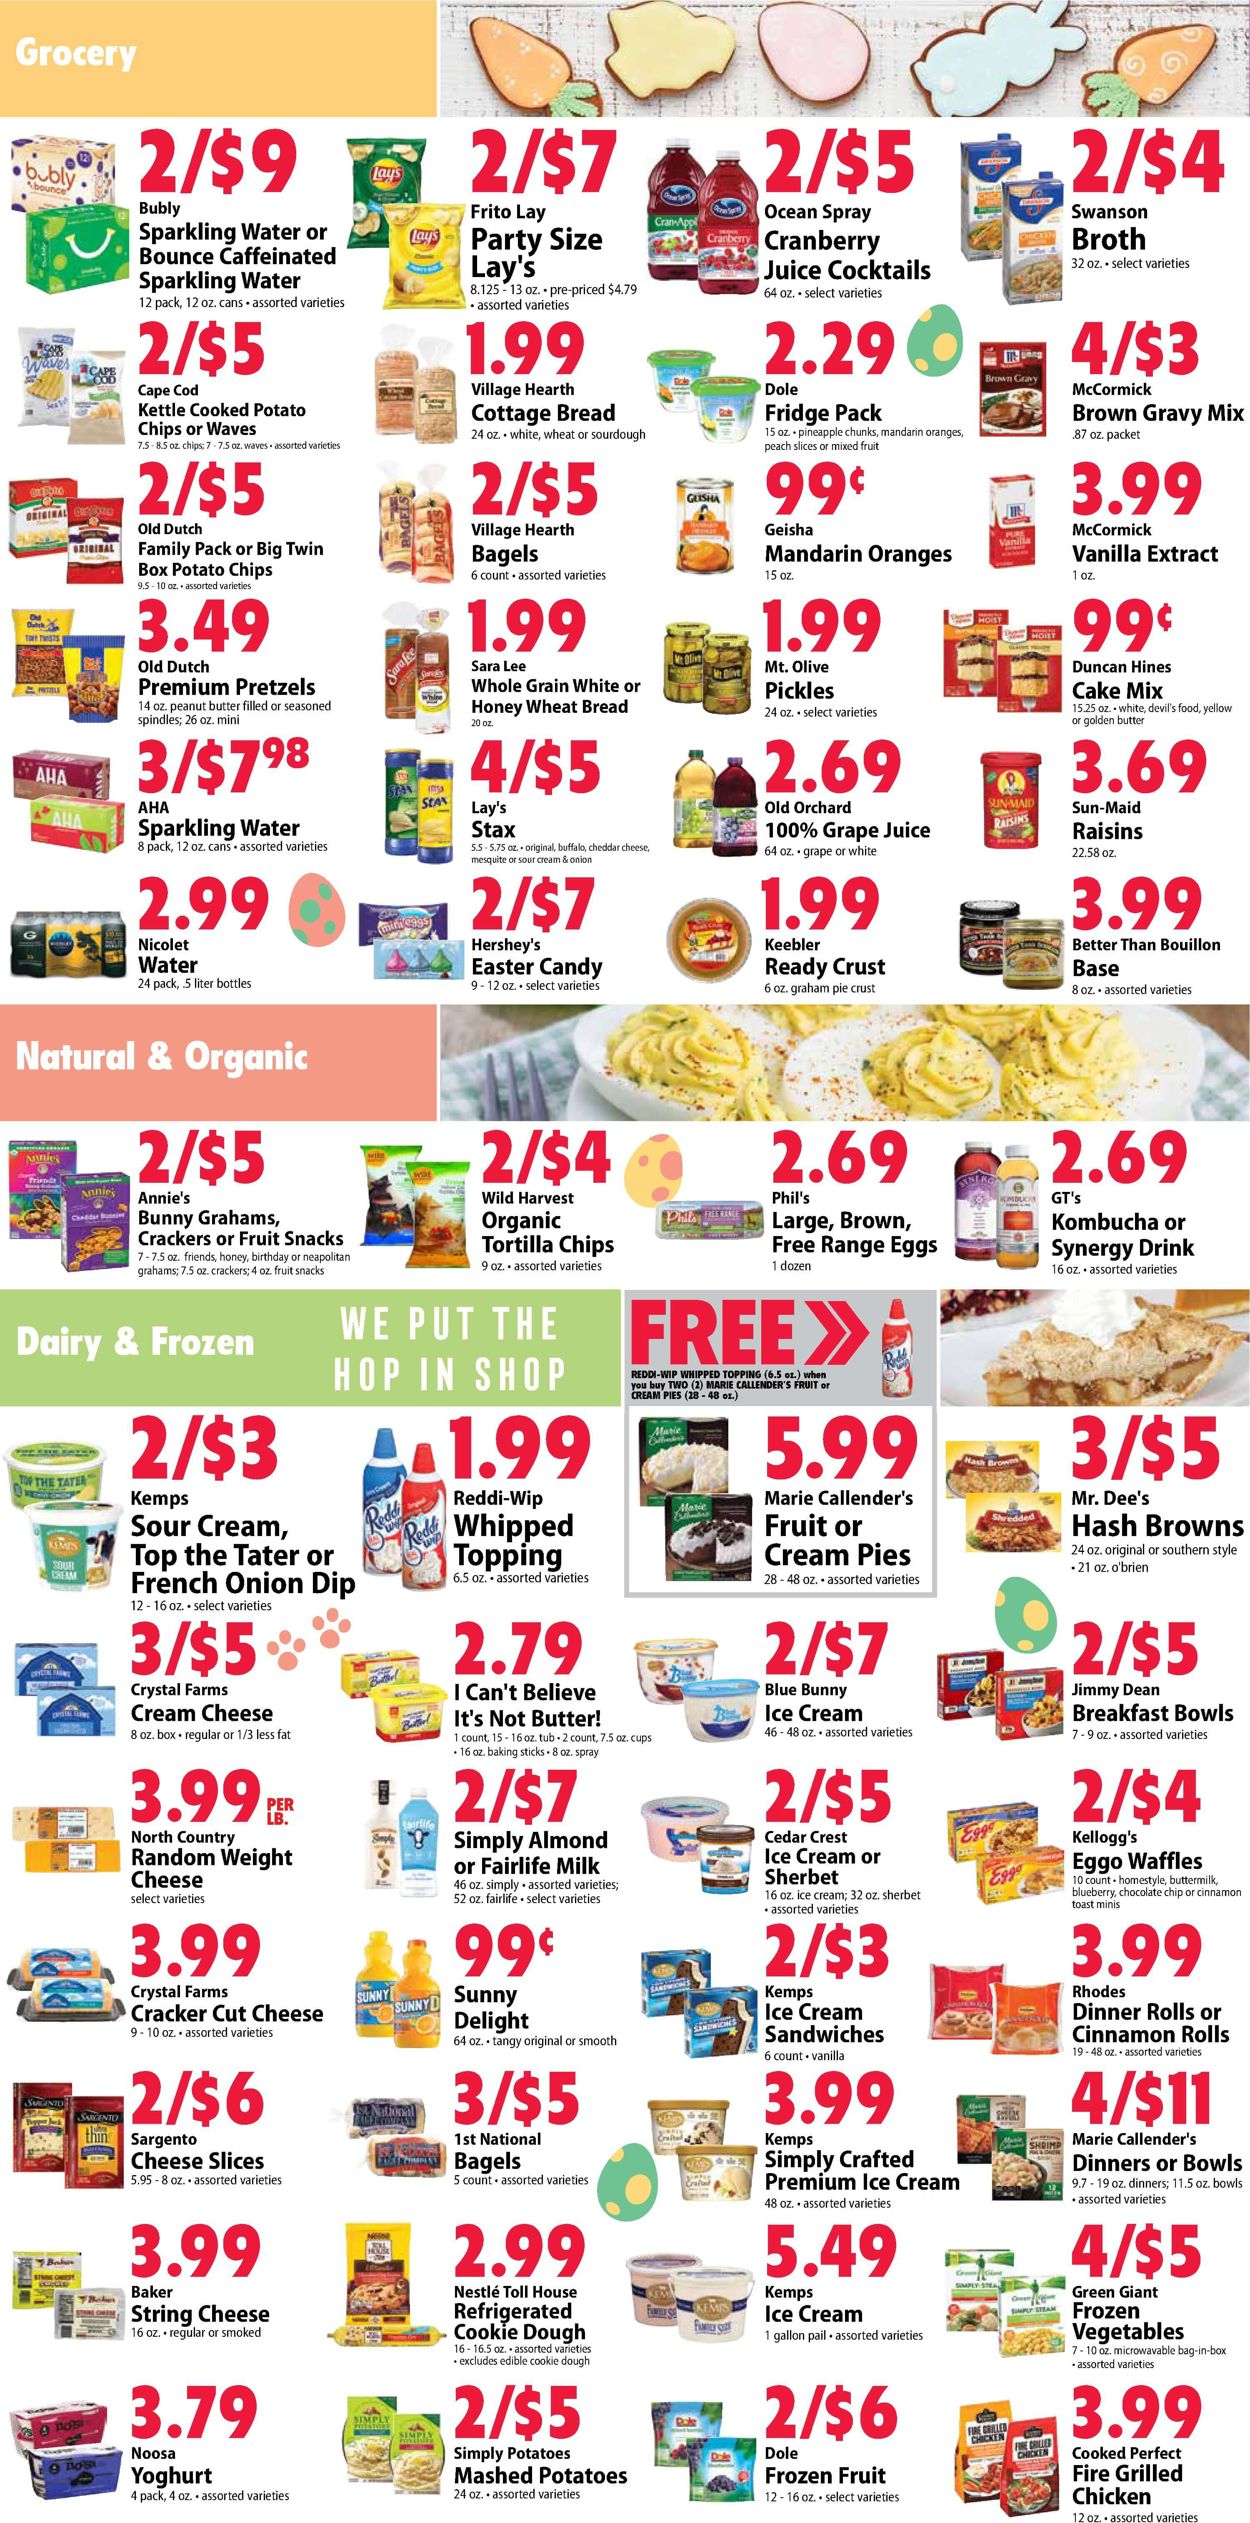 Festival Foods Easter 2021 ad Current weekly ad 03/31 - 04/06/2021 [3 ...